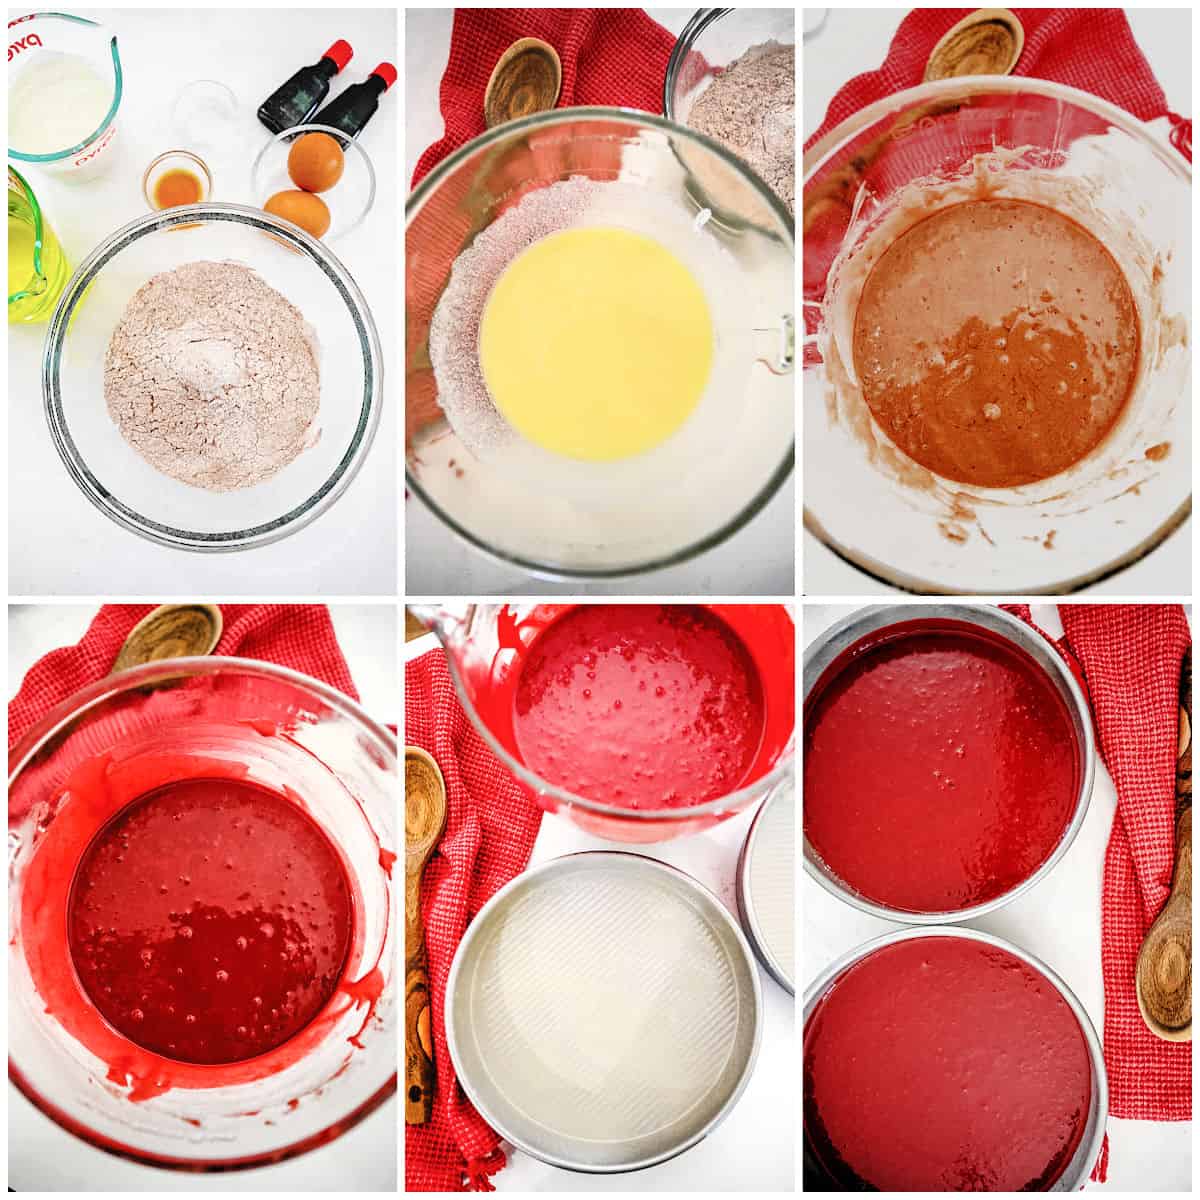 Collage image of stages of red velvet cake preparation.